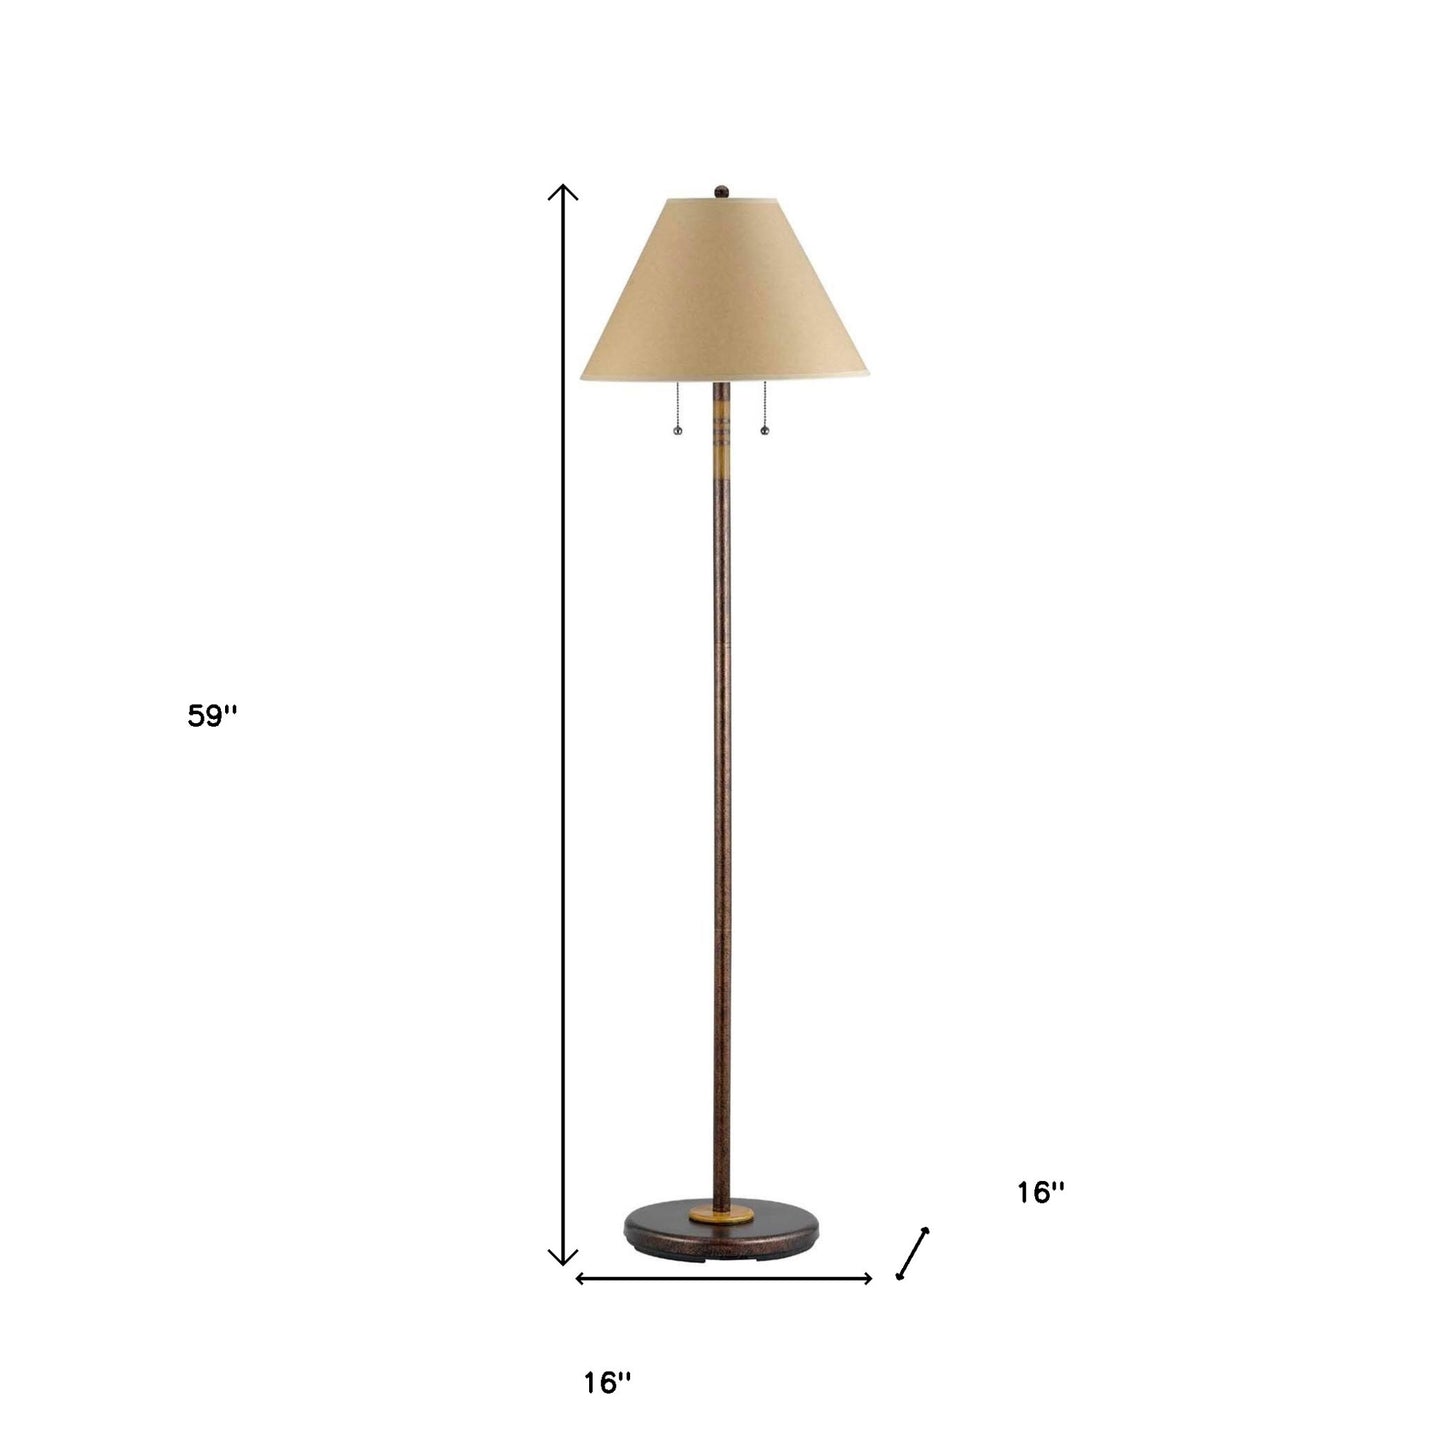 59" Rusted Two Light Traditional Shaped Floor Lamp With Brown Empire Shade